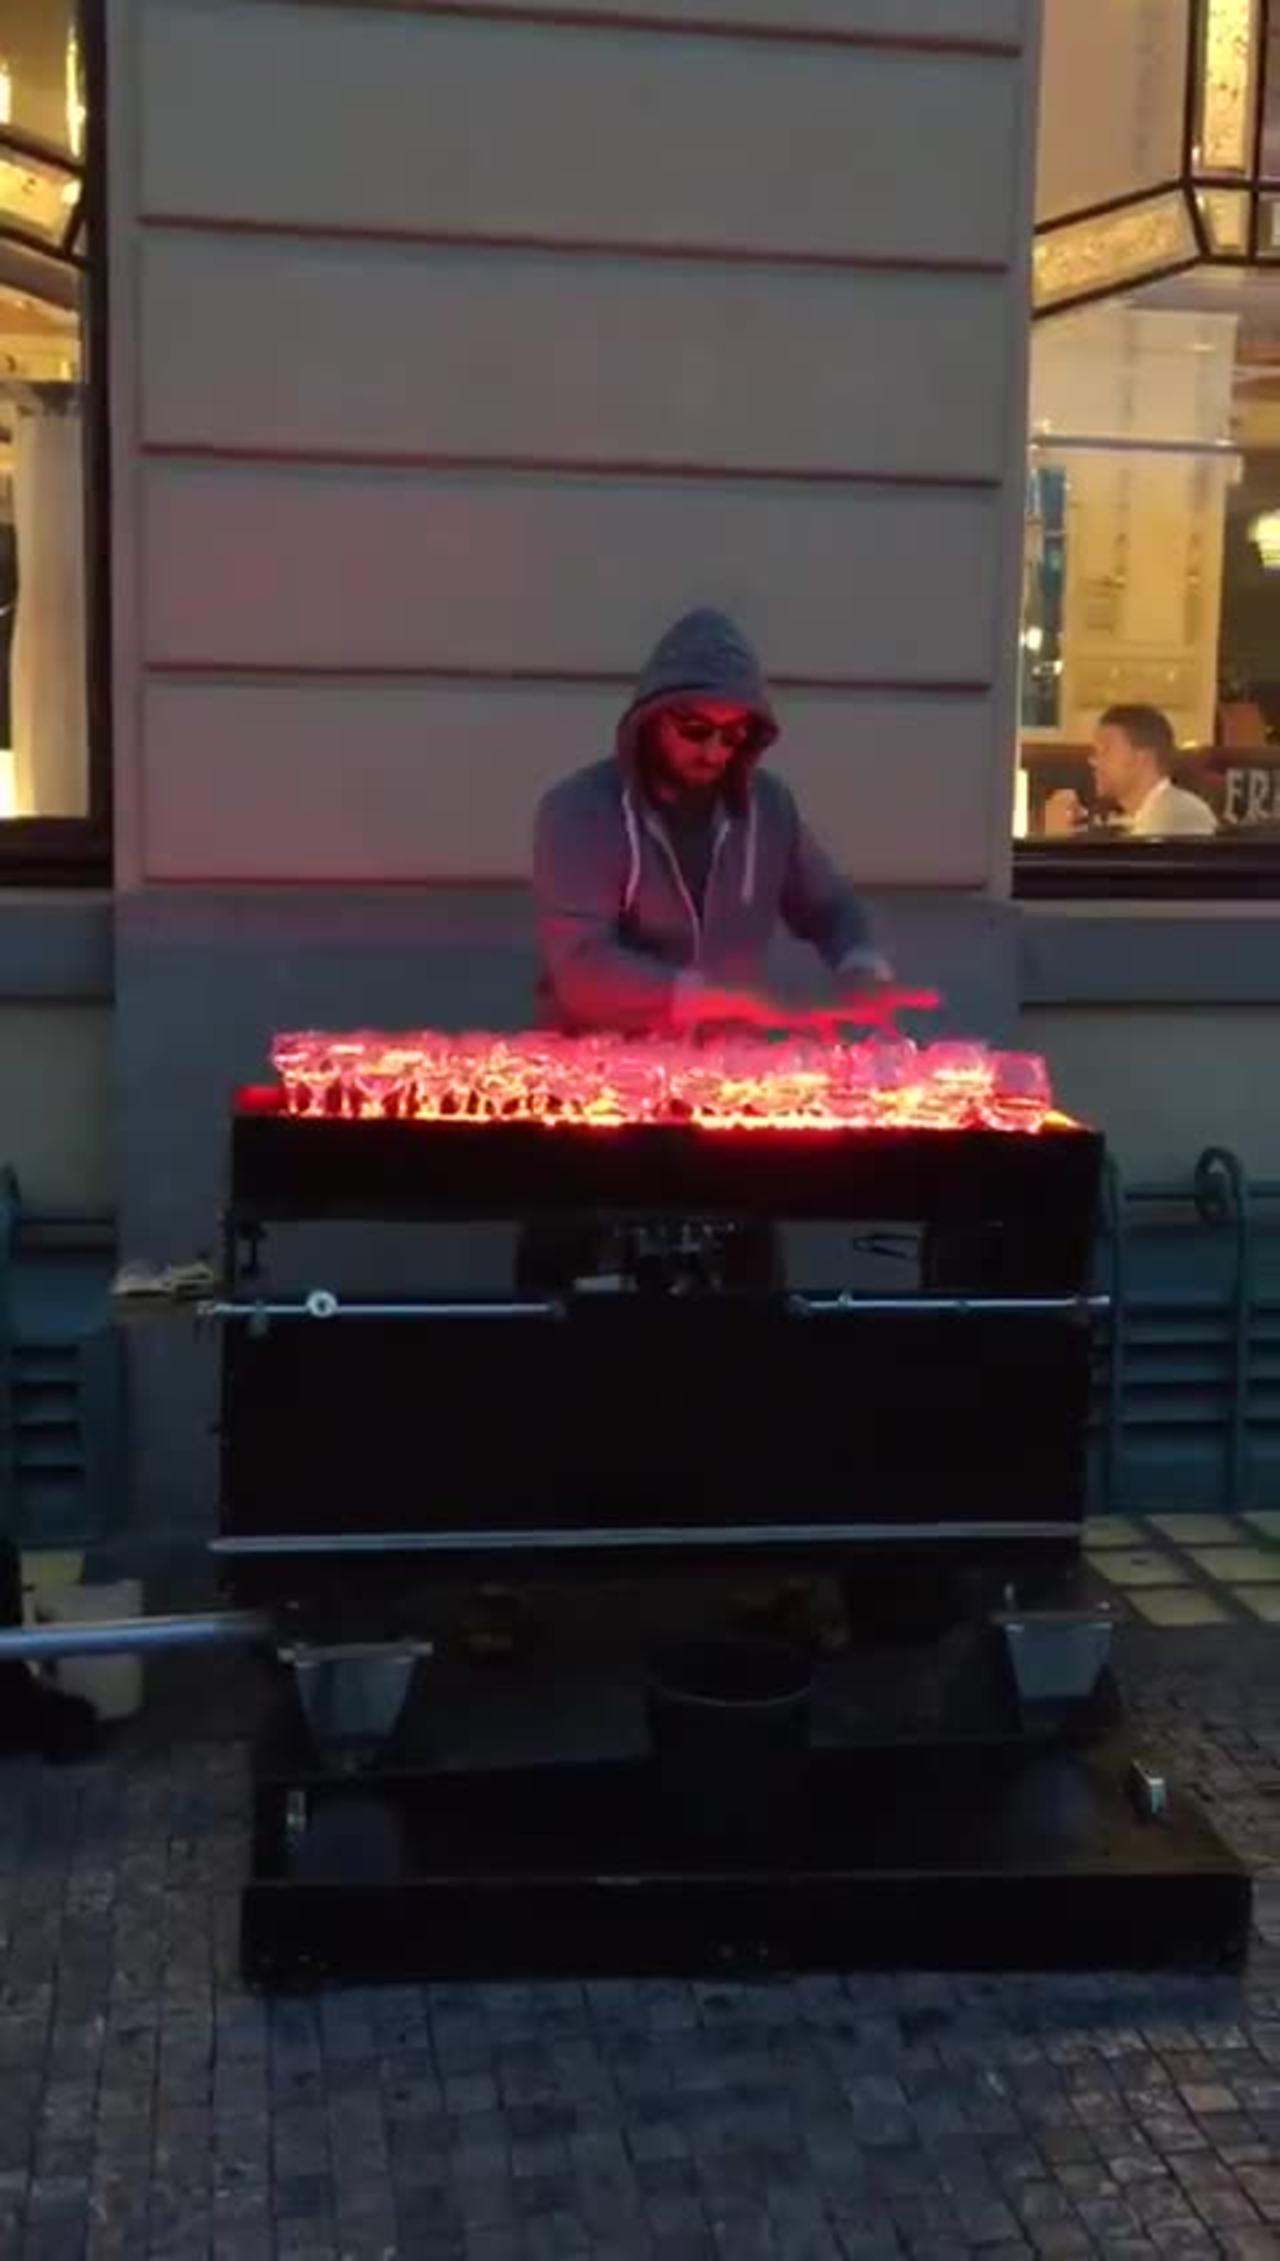 A street musician in Prague is playing music through a glass of water